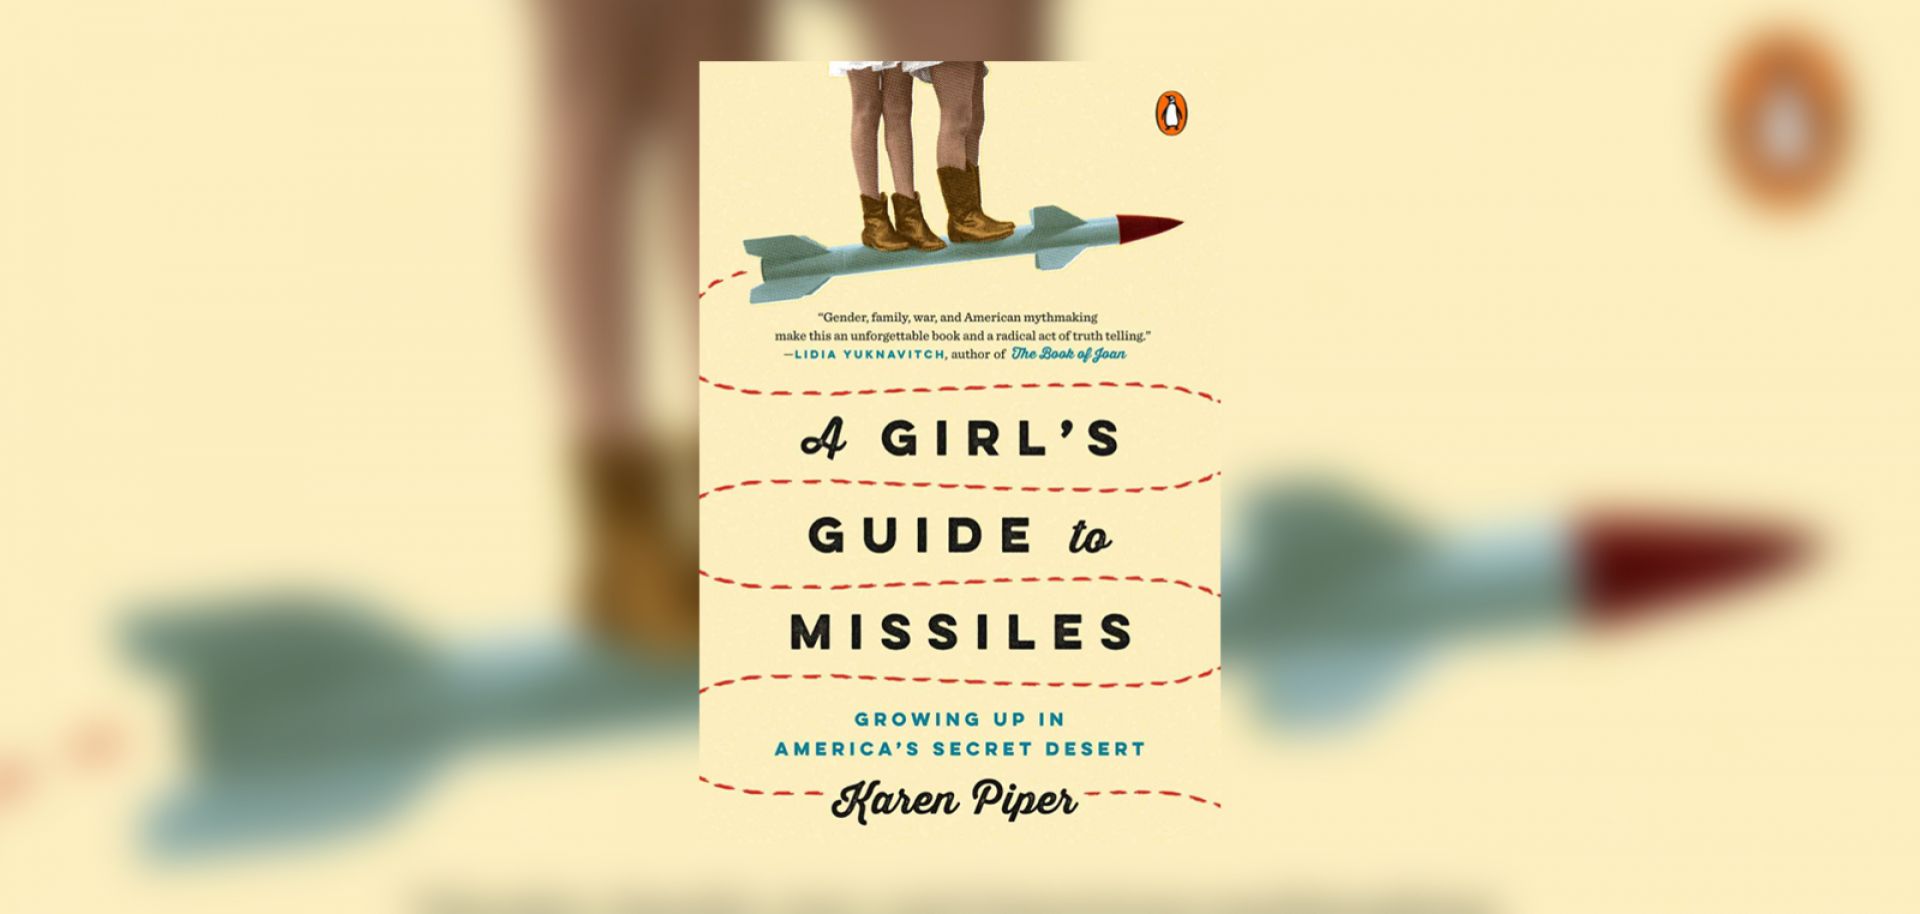 Karen Piper's A Girls Guide to Missiles